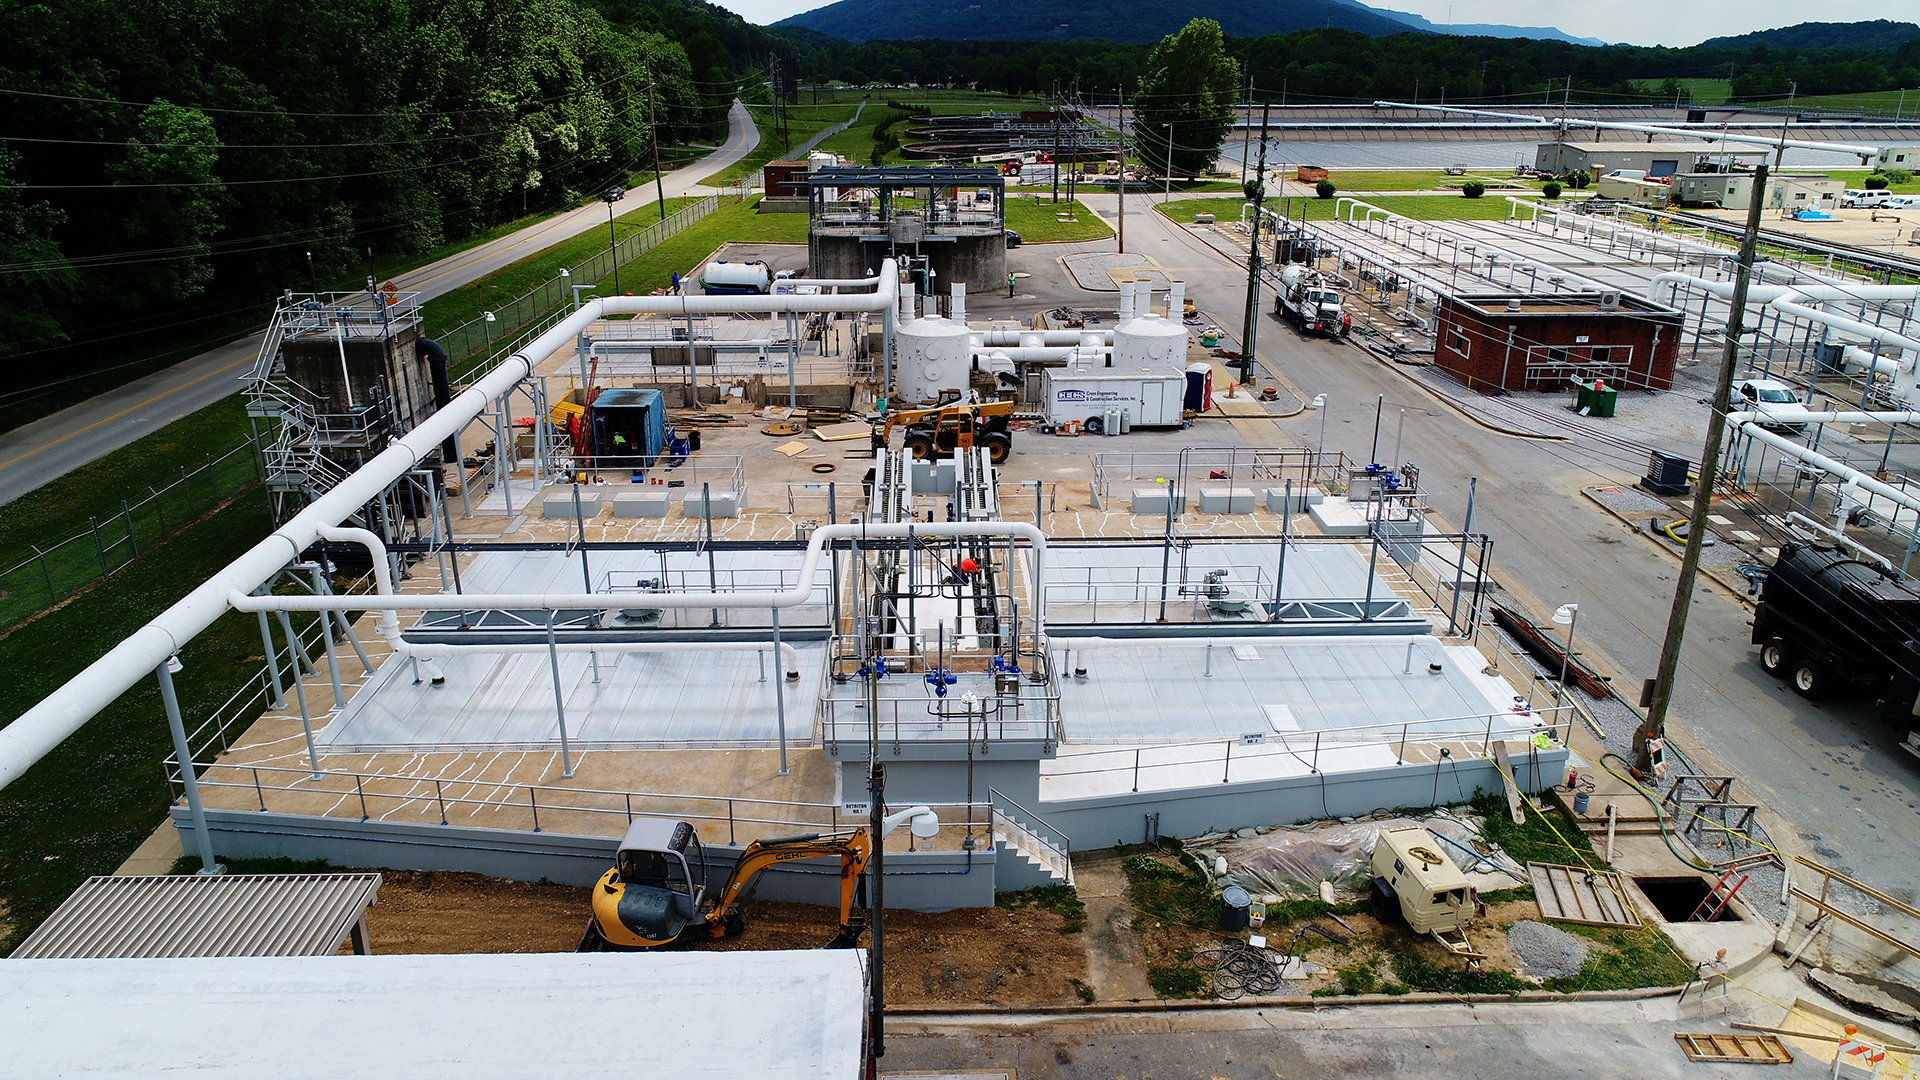 The city is making improvements to the Moccasin Bend Wastewater Treatment Plant, including the rehabilitation and upgrade of influent grit detritors and related splitter box in an effort to increase performance of the screening operations and reduce SSOs. (Photo Courtesy of Chattanooga Department of Public Works)